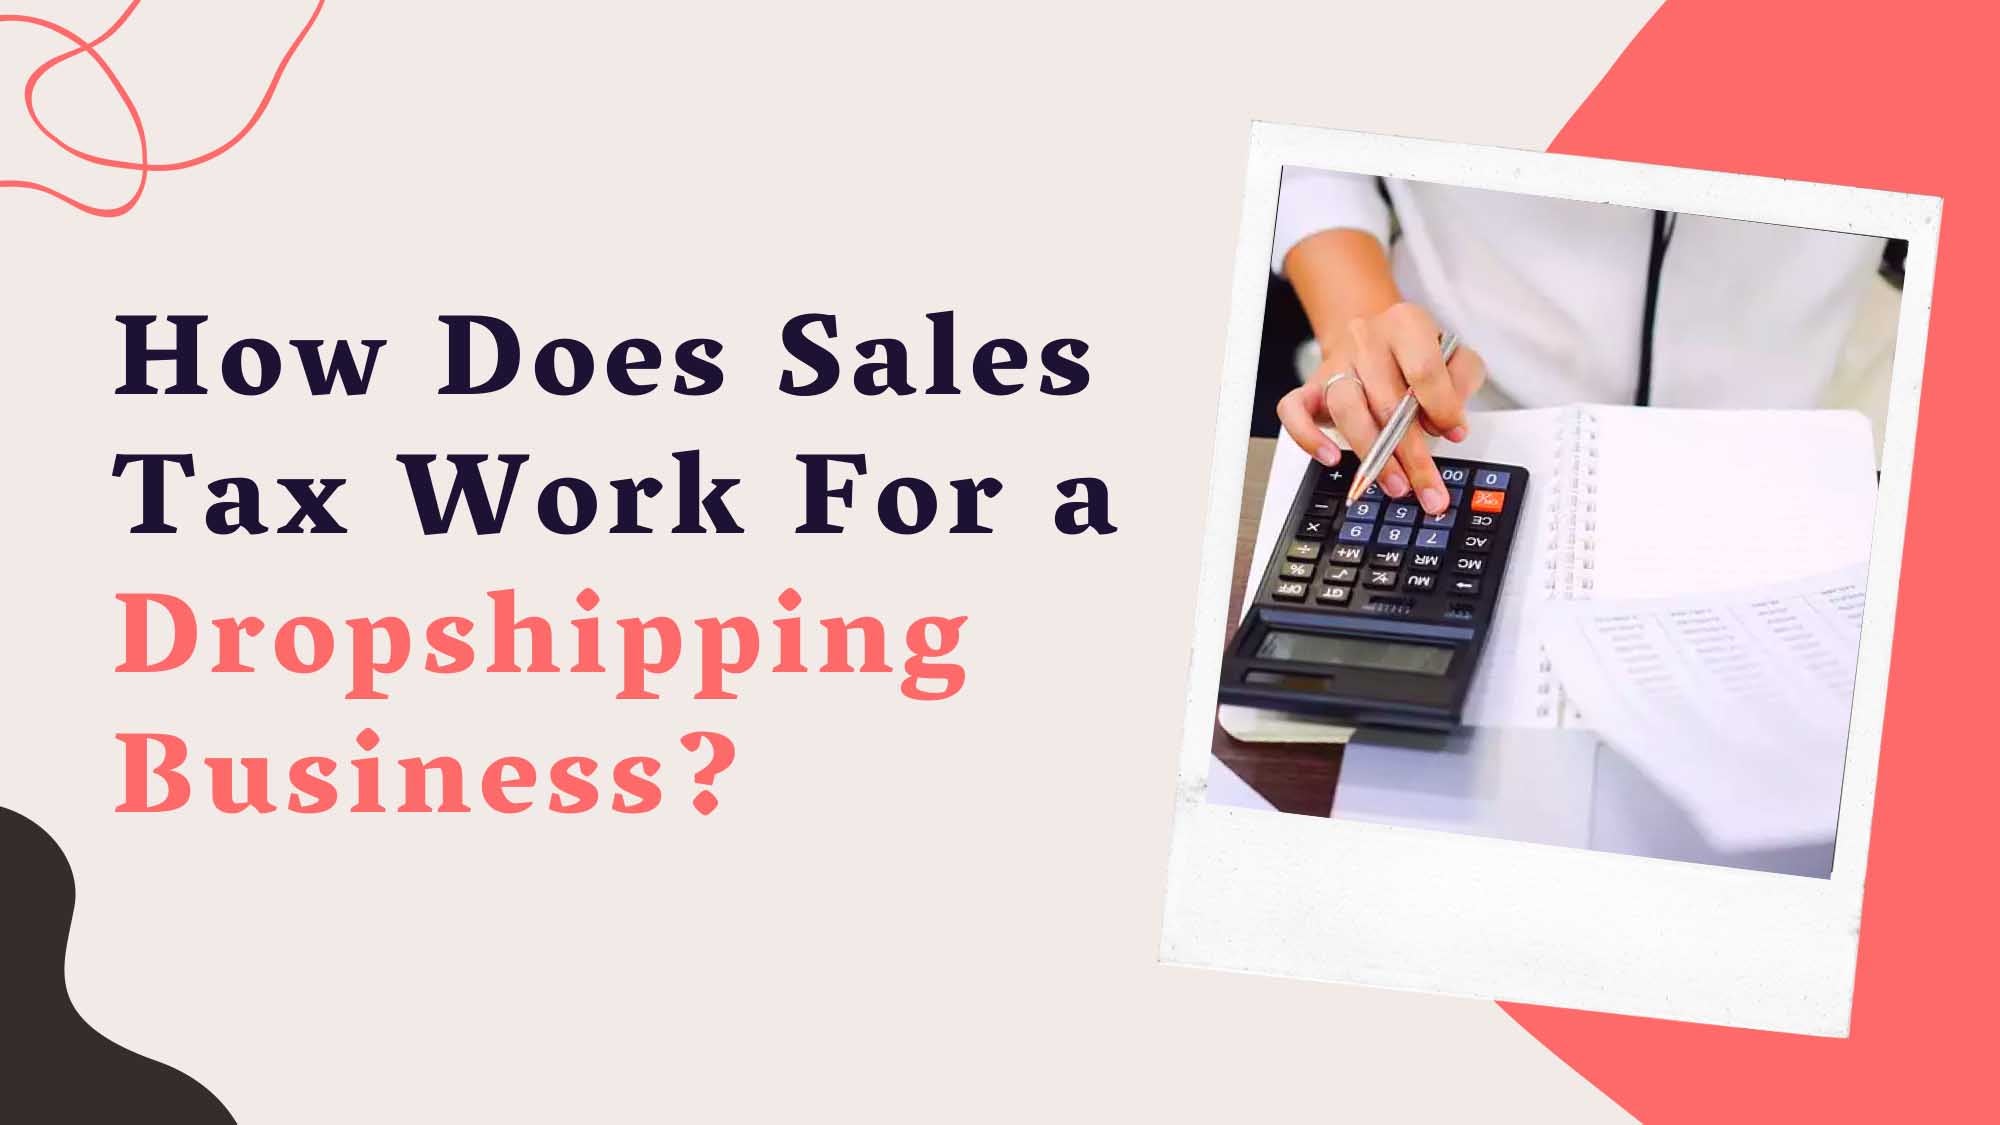 How Does Sales Tax Work For A Dropshipping Business?